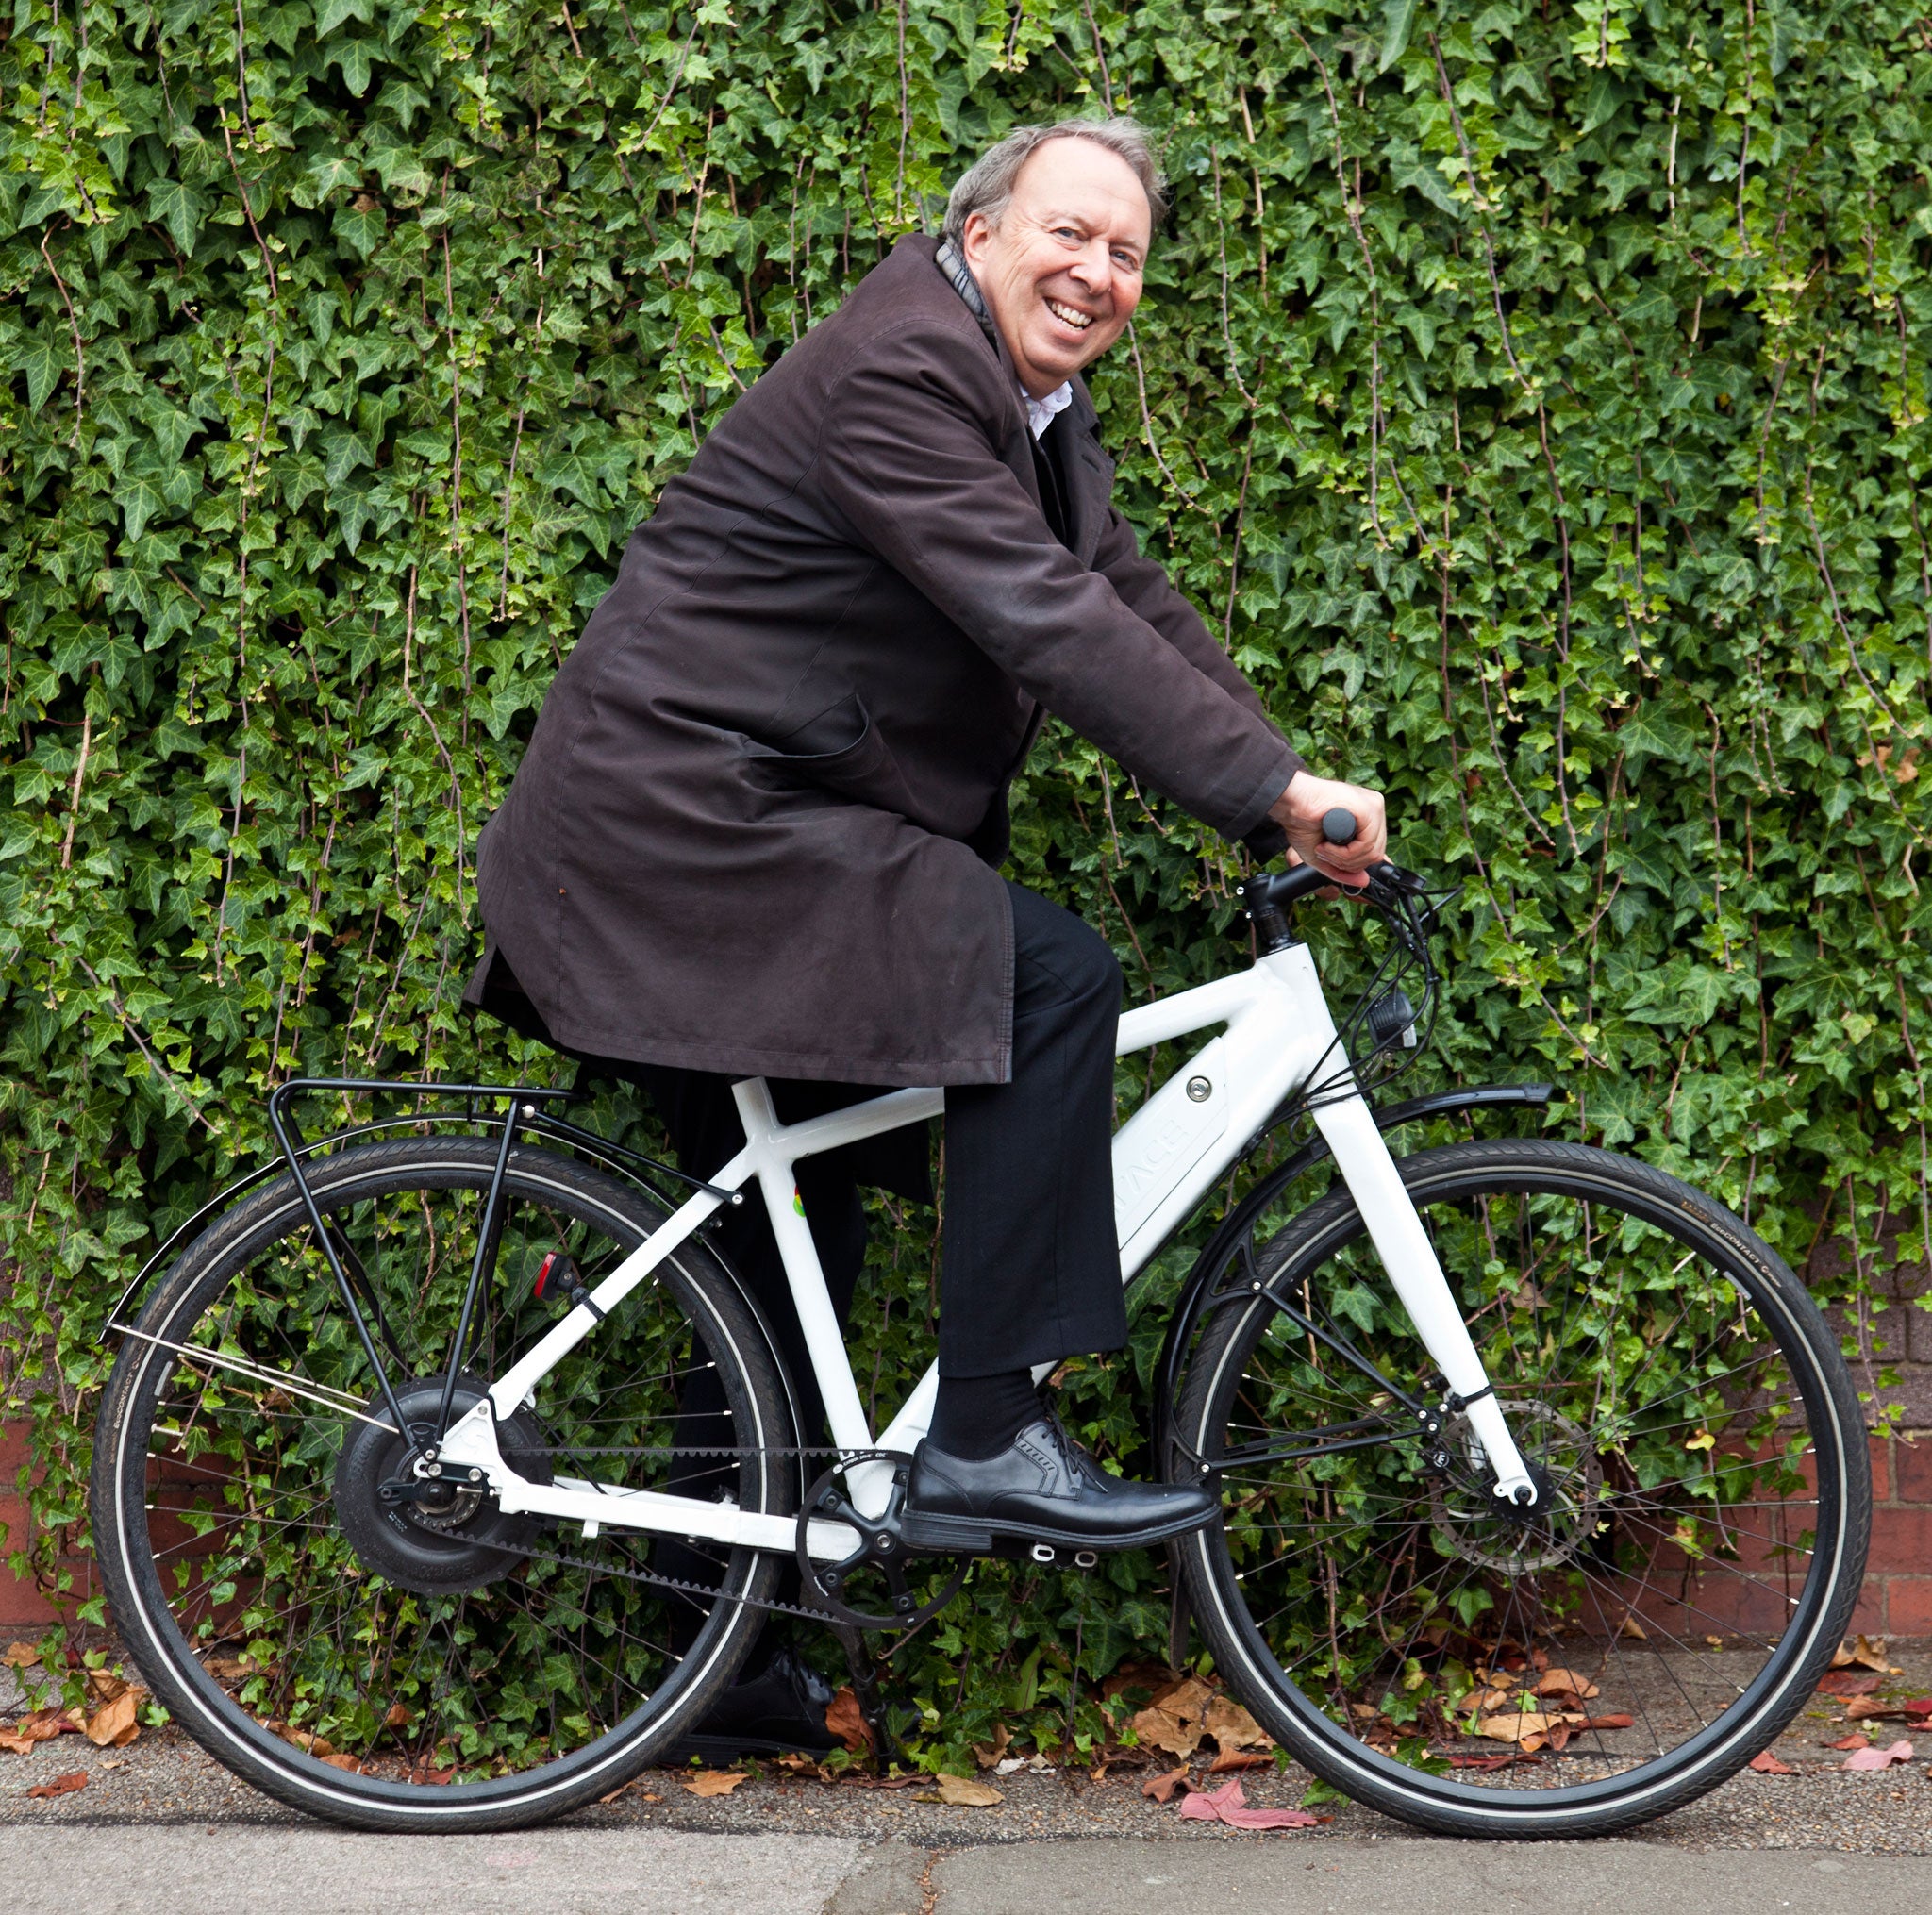 Steve Richards opted for a ready-made electric bike, an ex-display Easy model by the German maker Grace